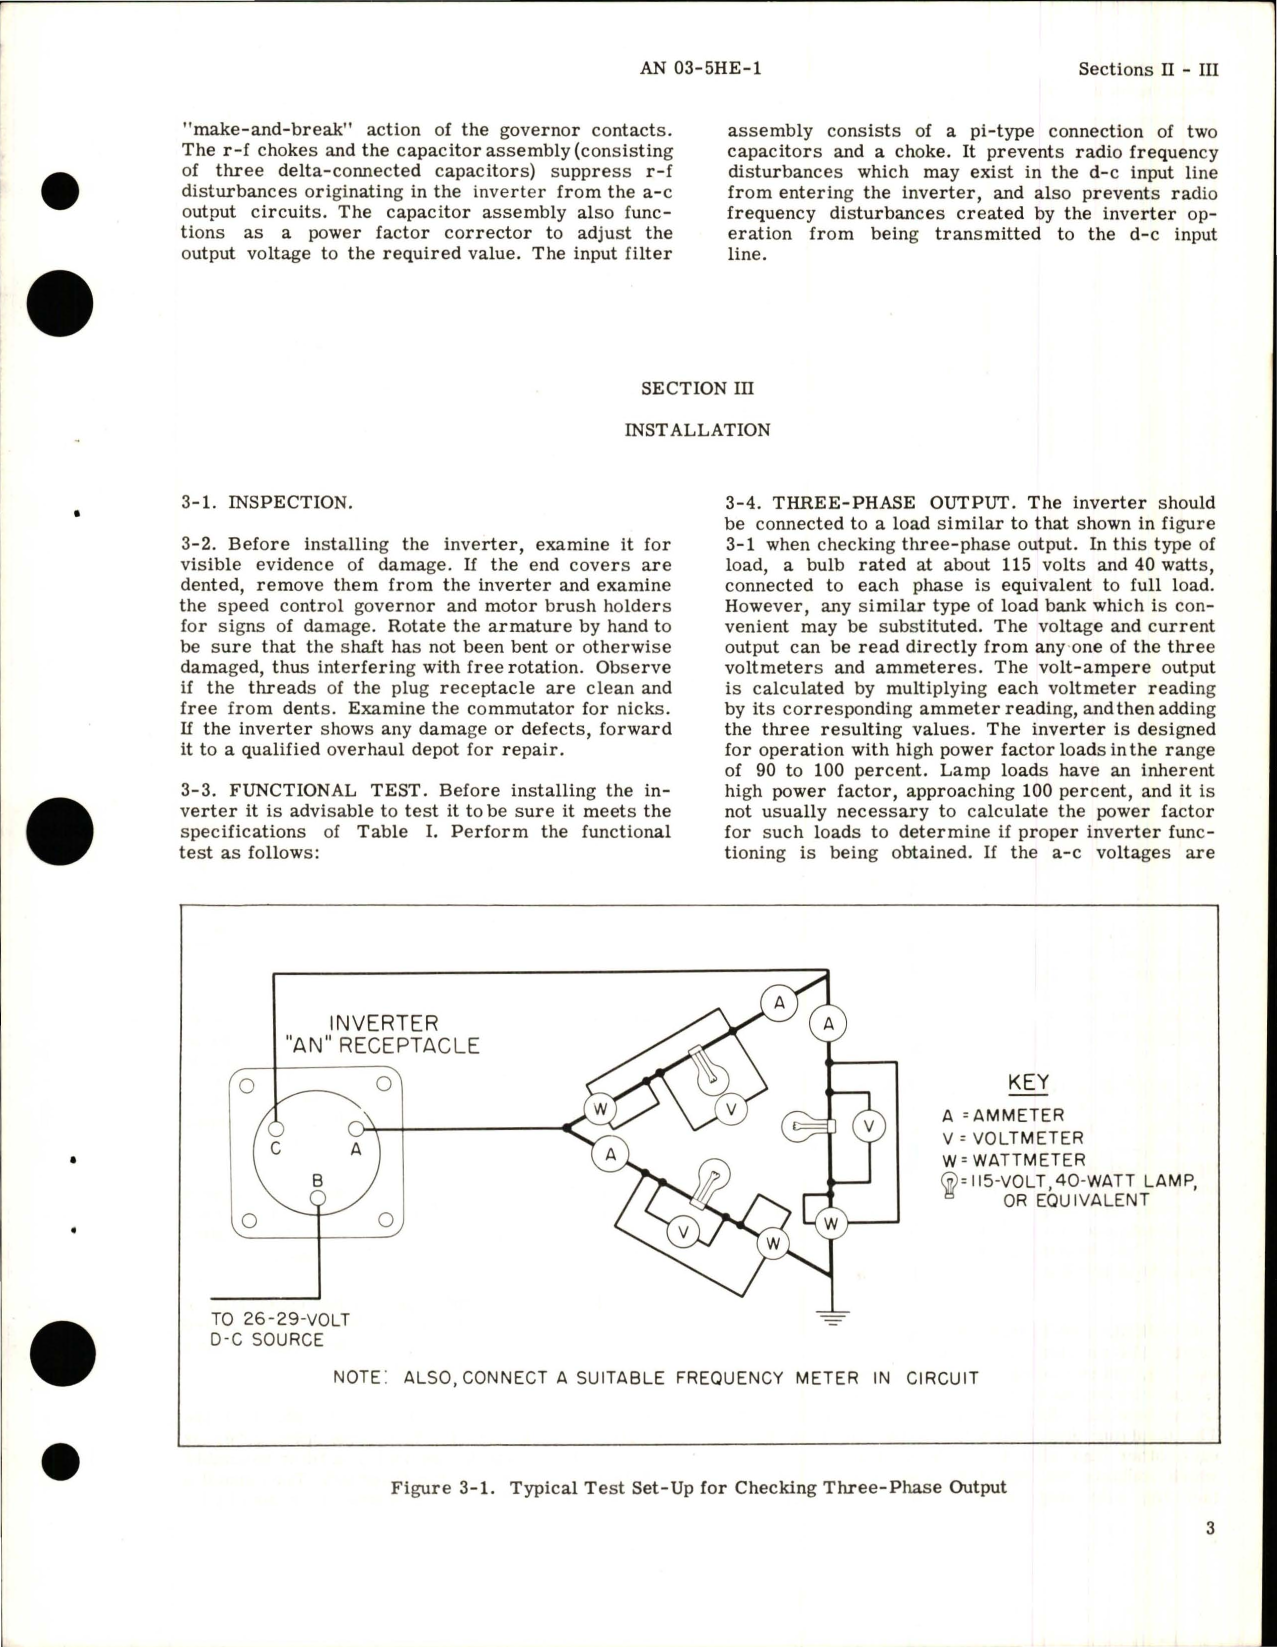 Sample page 7 from AirCorps Library document: Operation and Service Instructions for Inverter - Type DMZ3508M-PM3508G-X